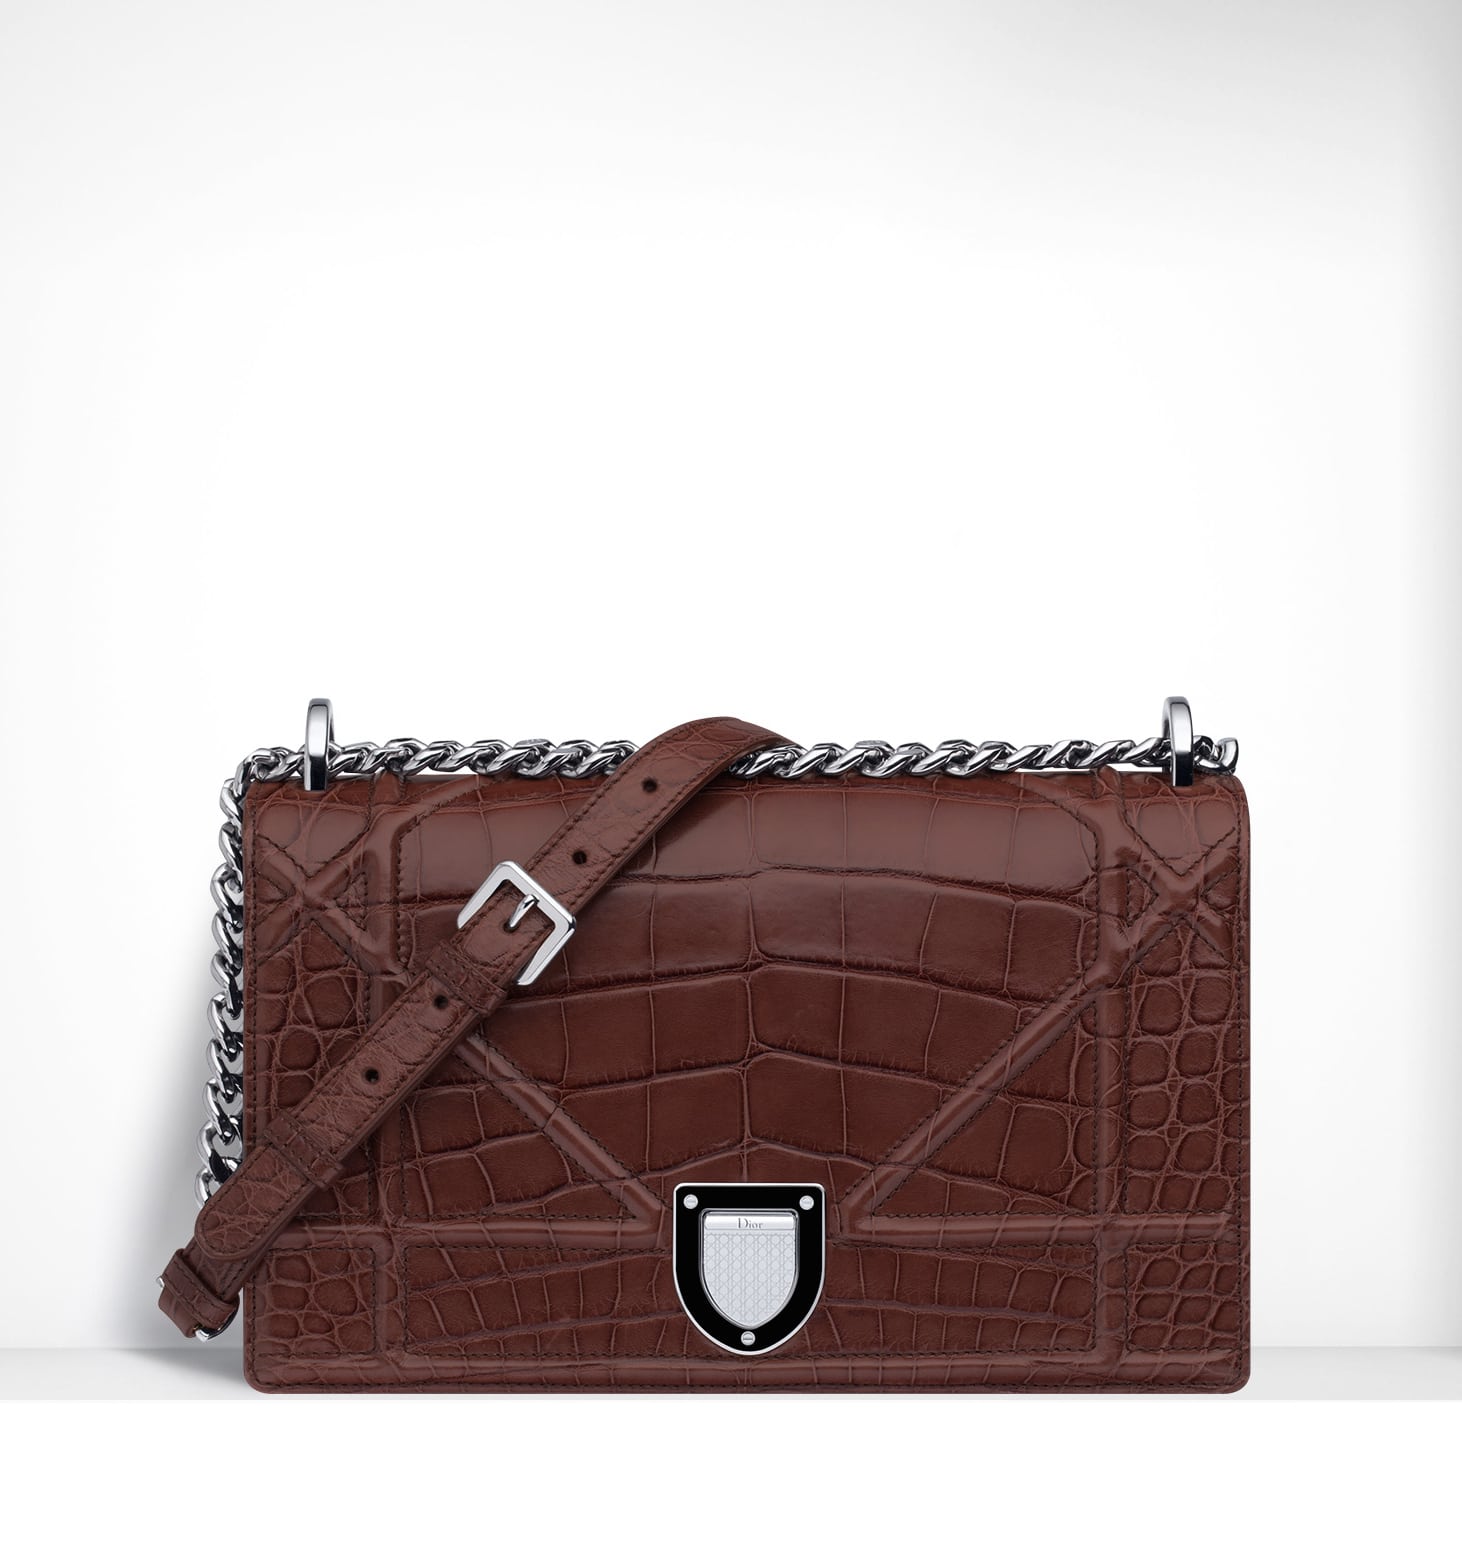 Dior Spring/Summer 2015 Bag Collection featuring Furistic Details ...